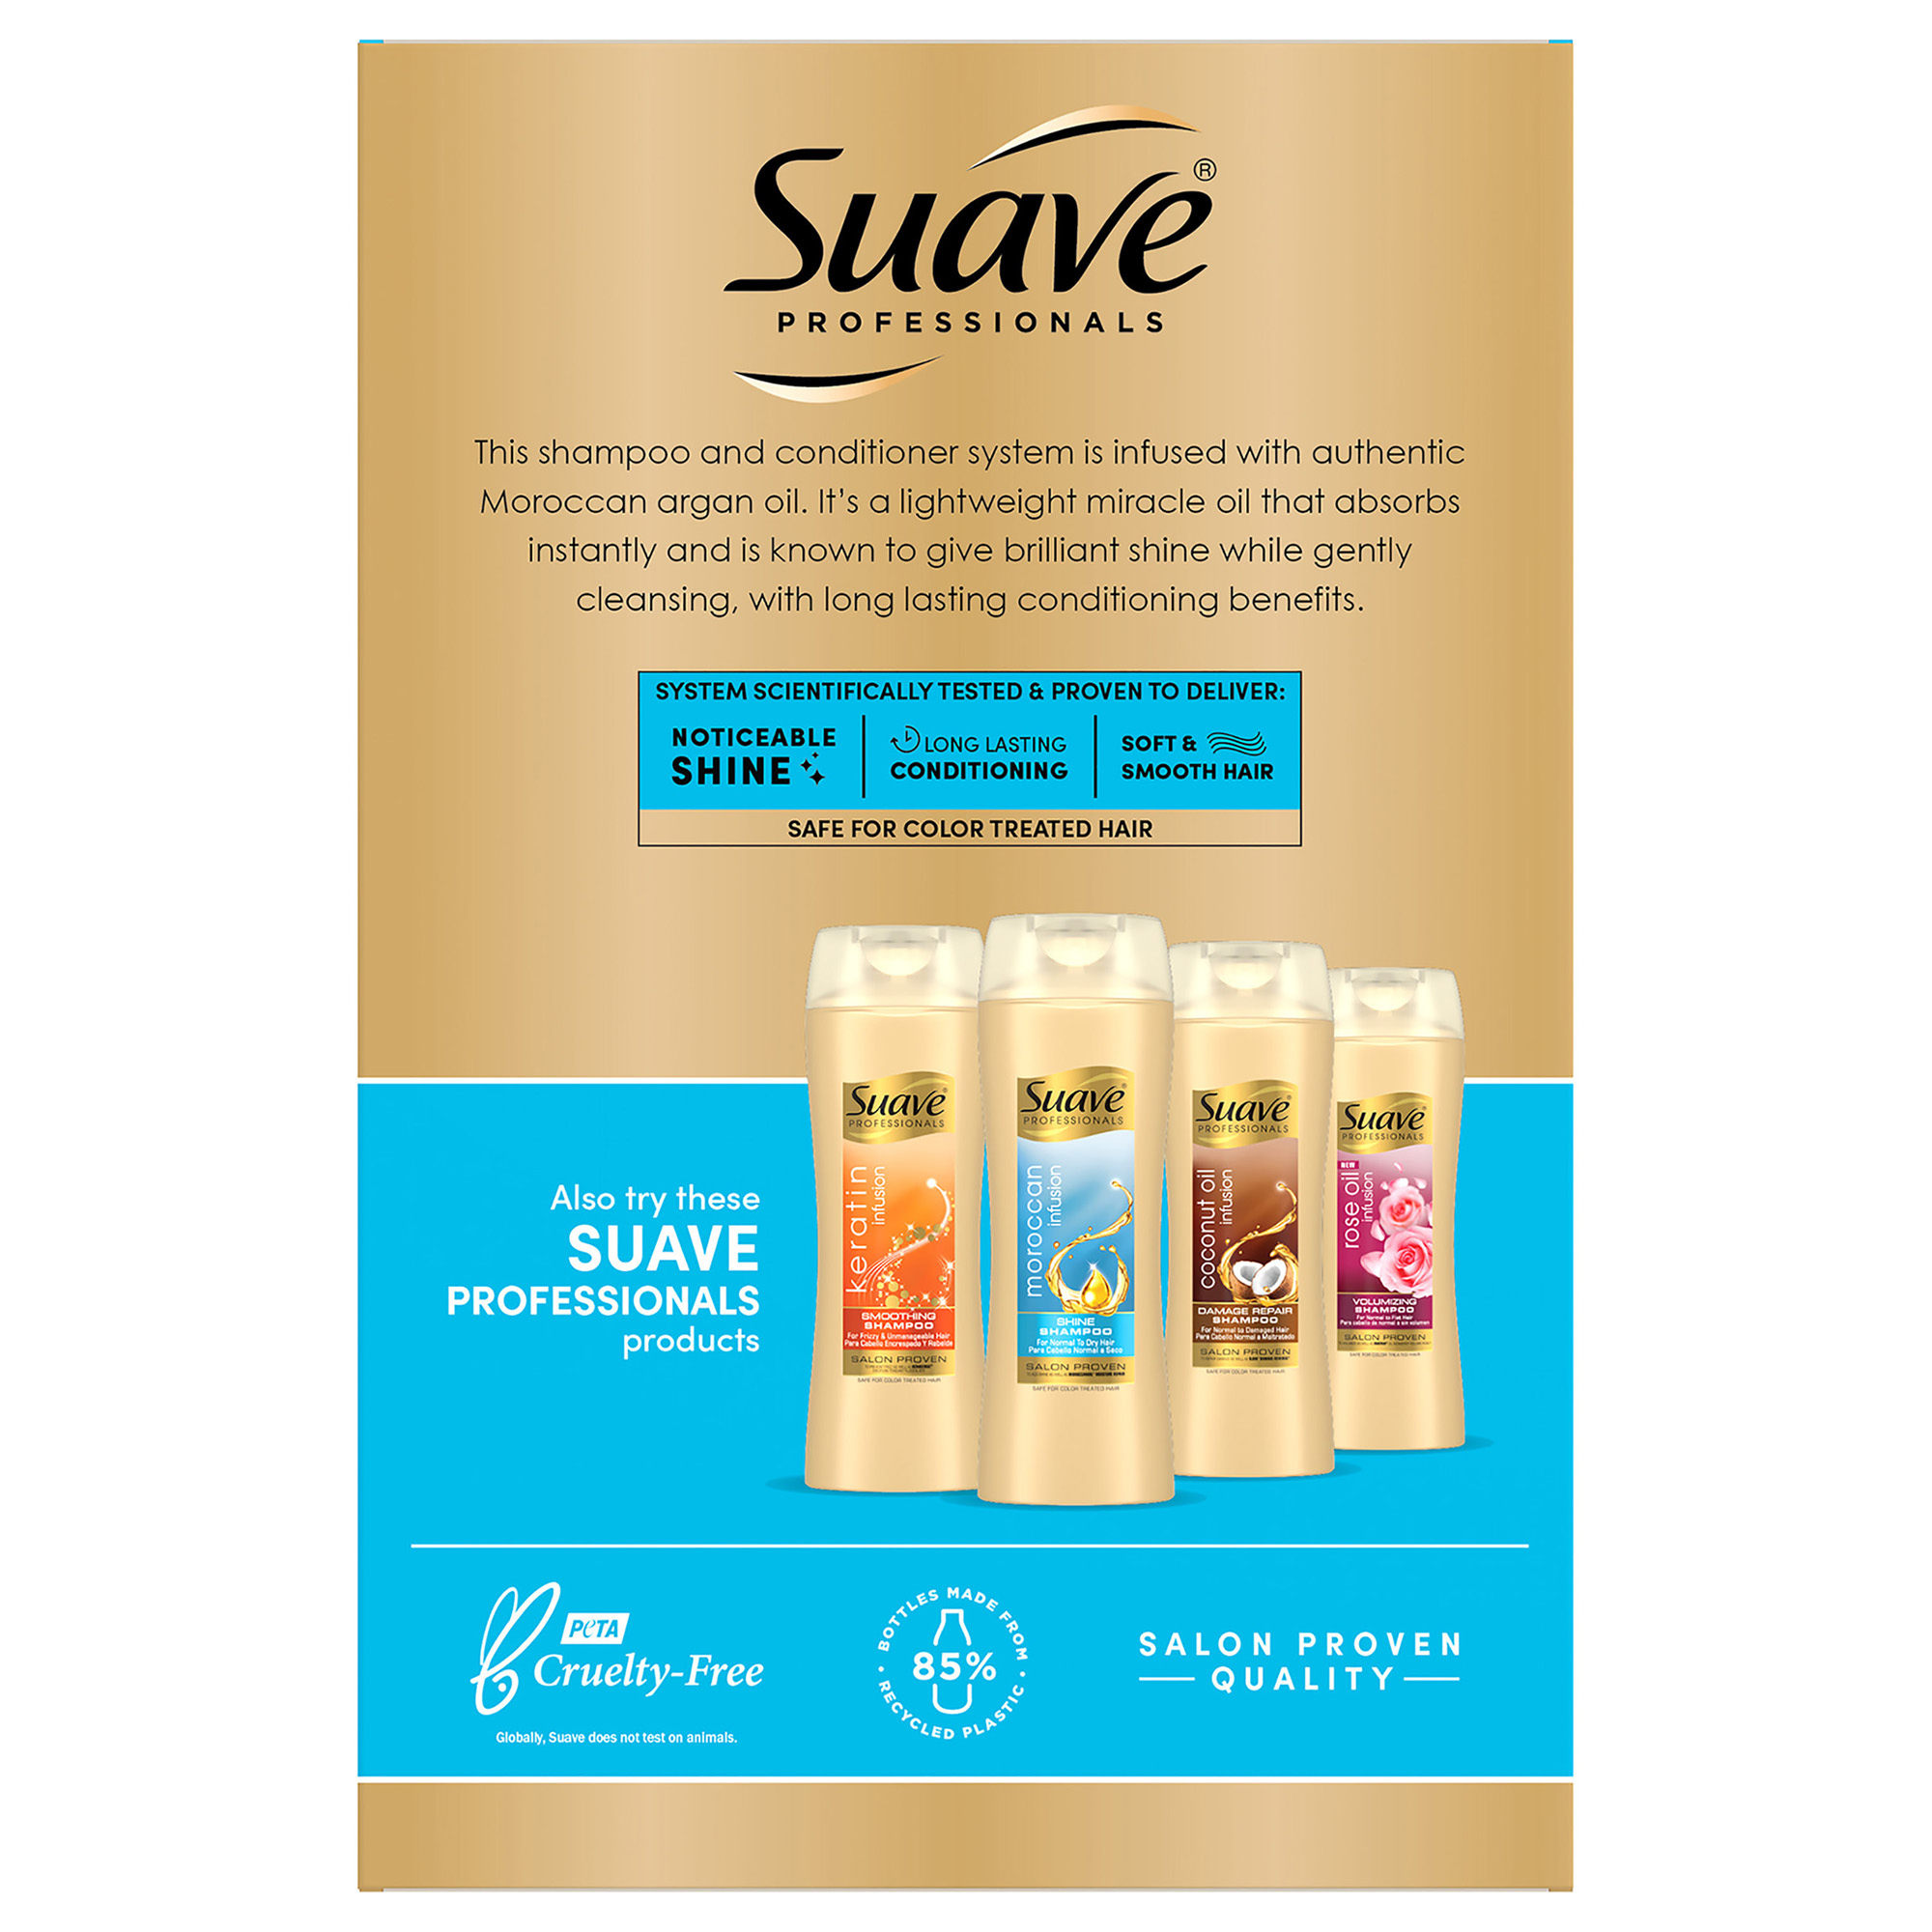 Suave Moroccan Infusion with Argan Oil Shine Shampoo and Conditioner, 12.6 oz 2 Pack - image 5 of 8